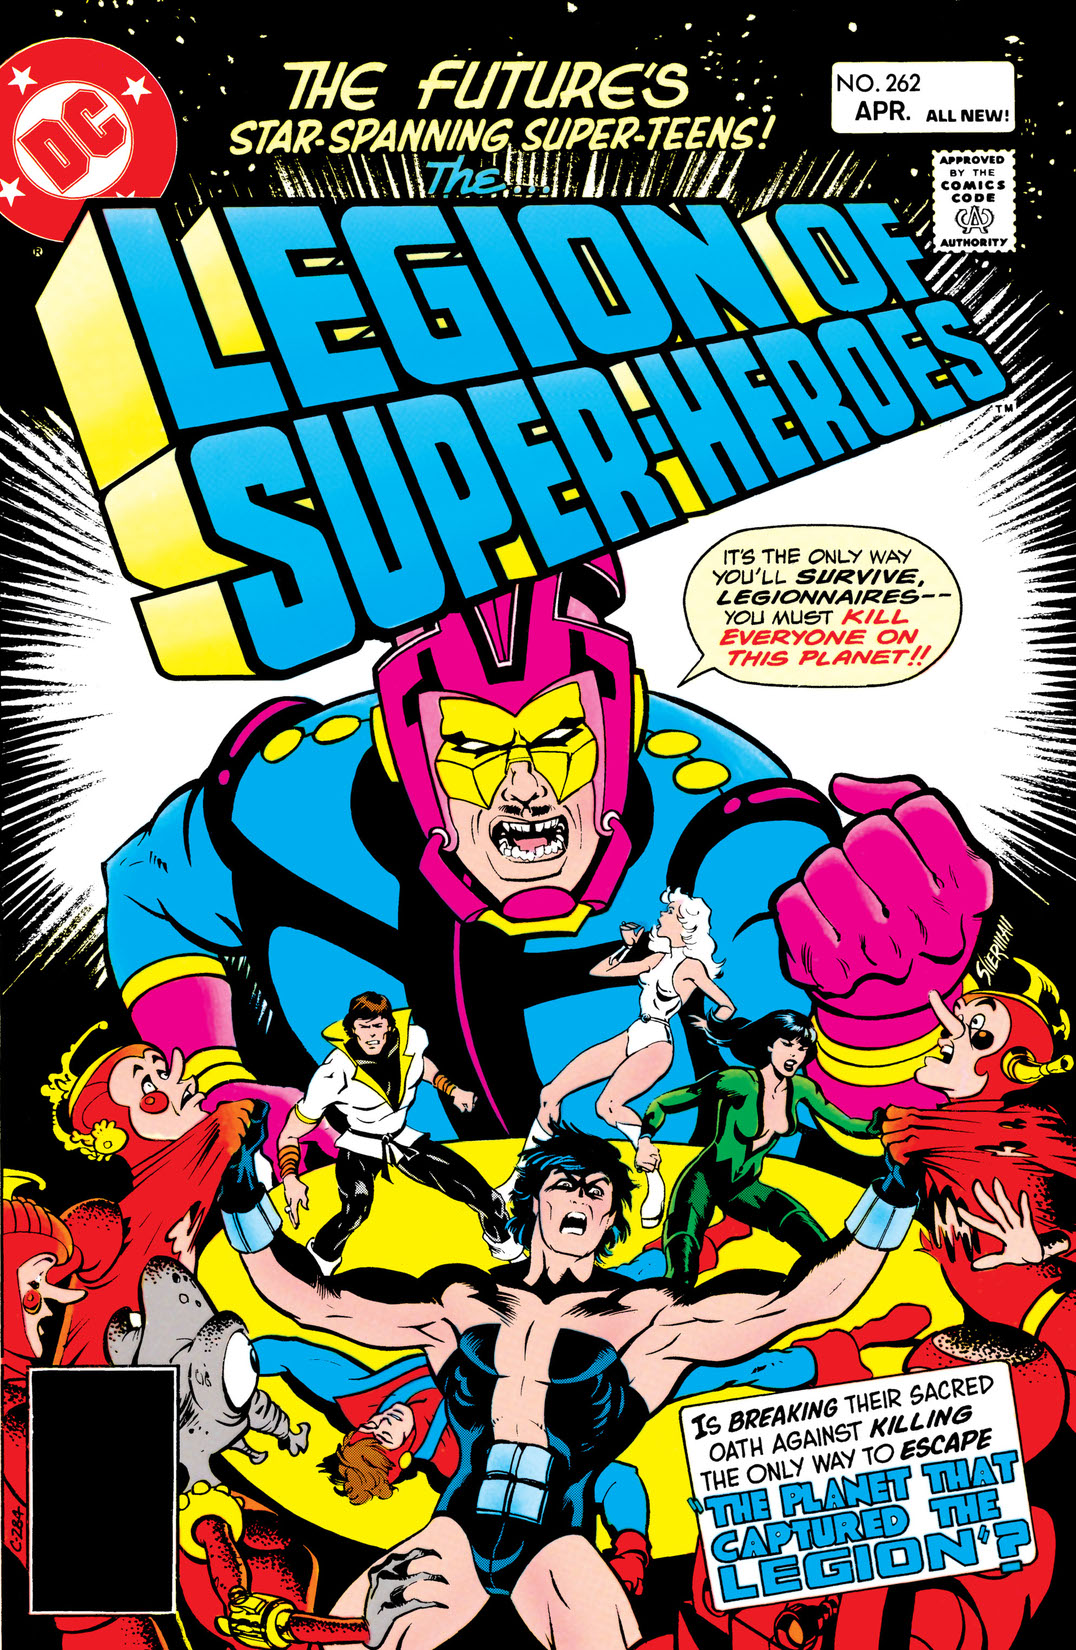 The Legion of Super-Heroes (1980-) #262 preview images